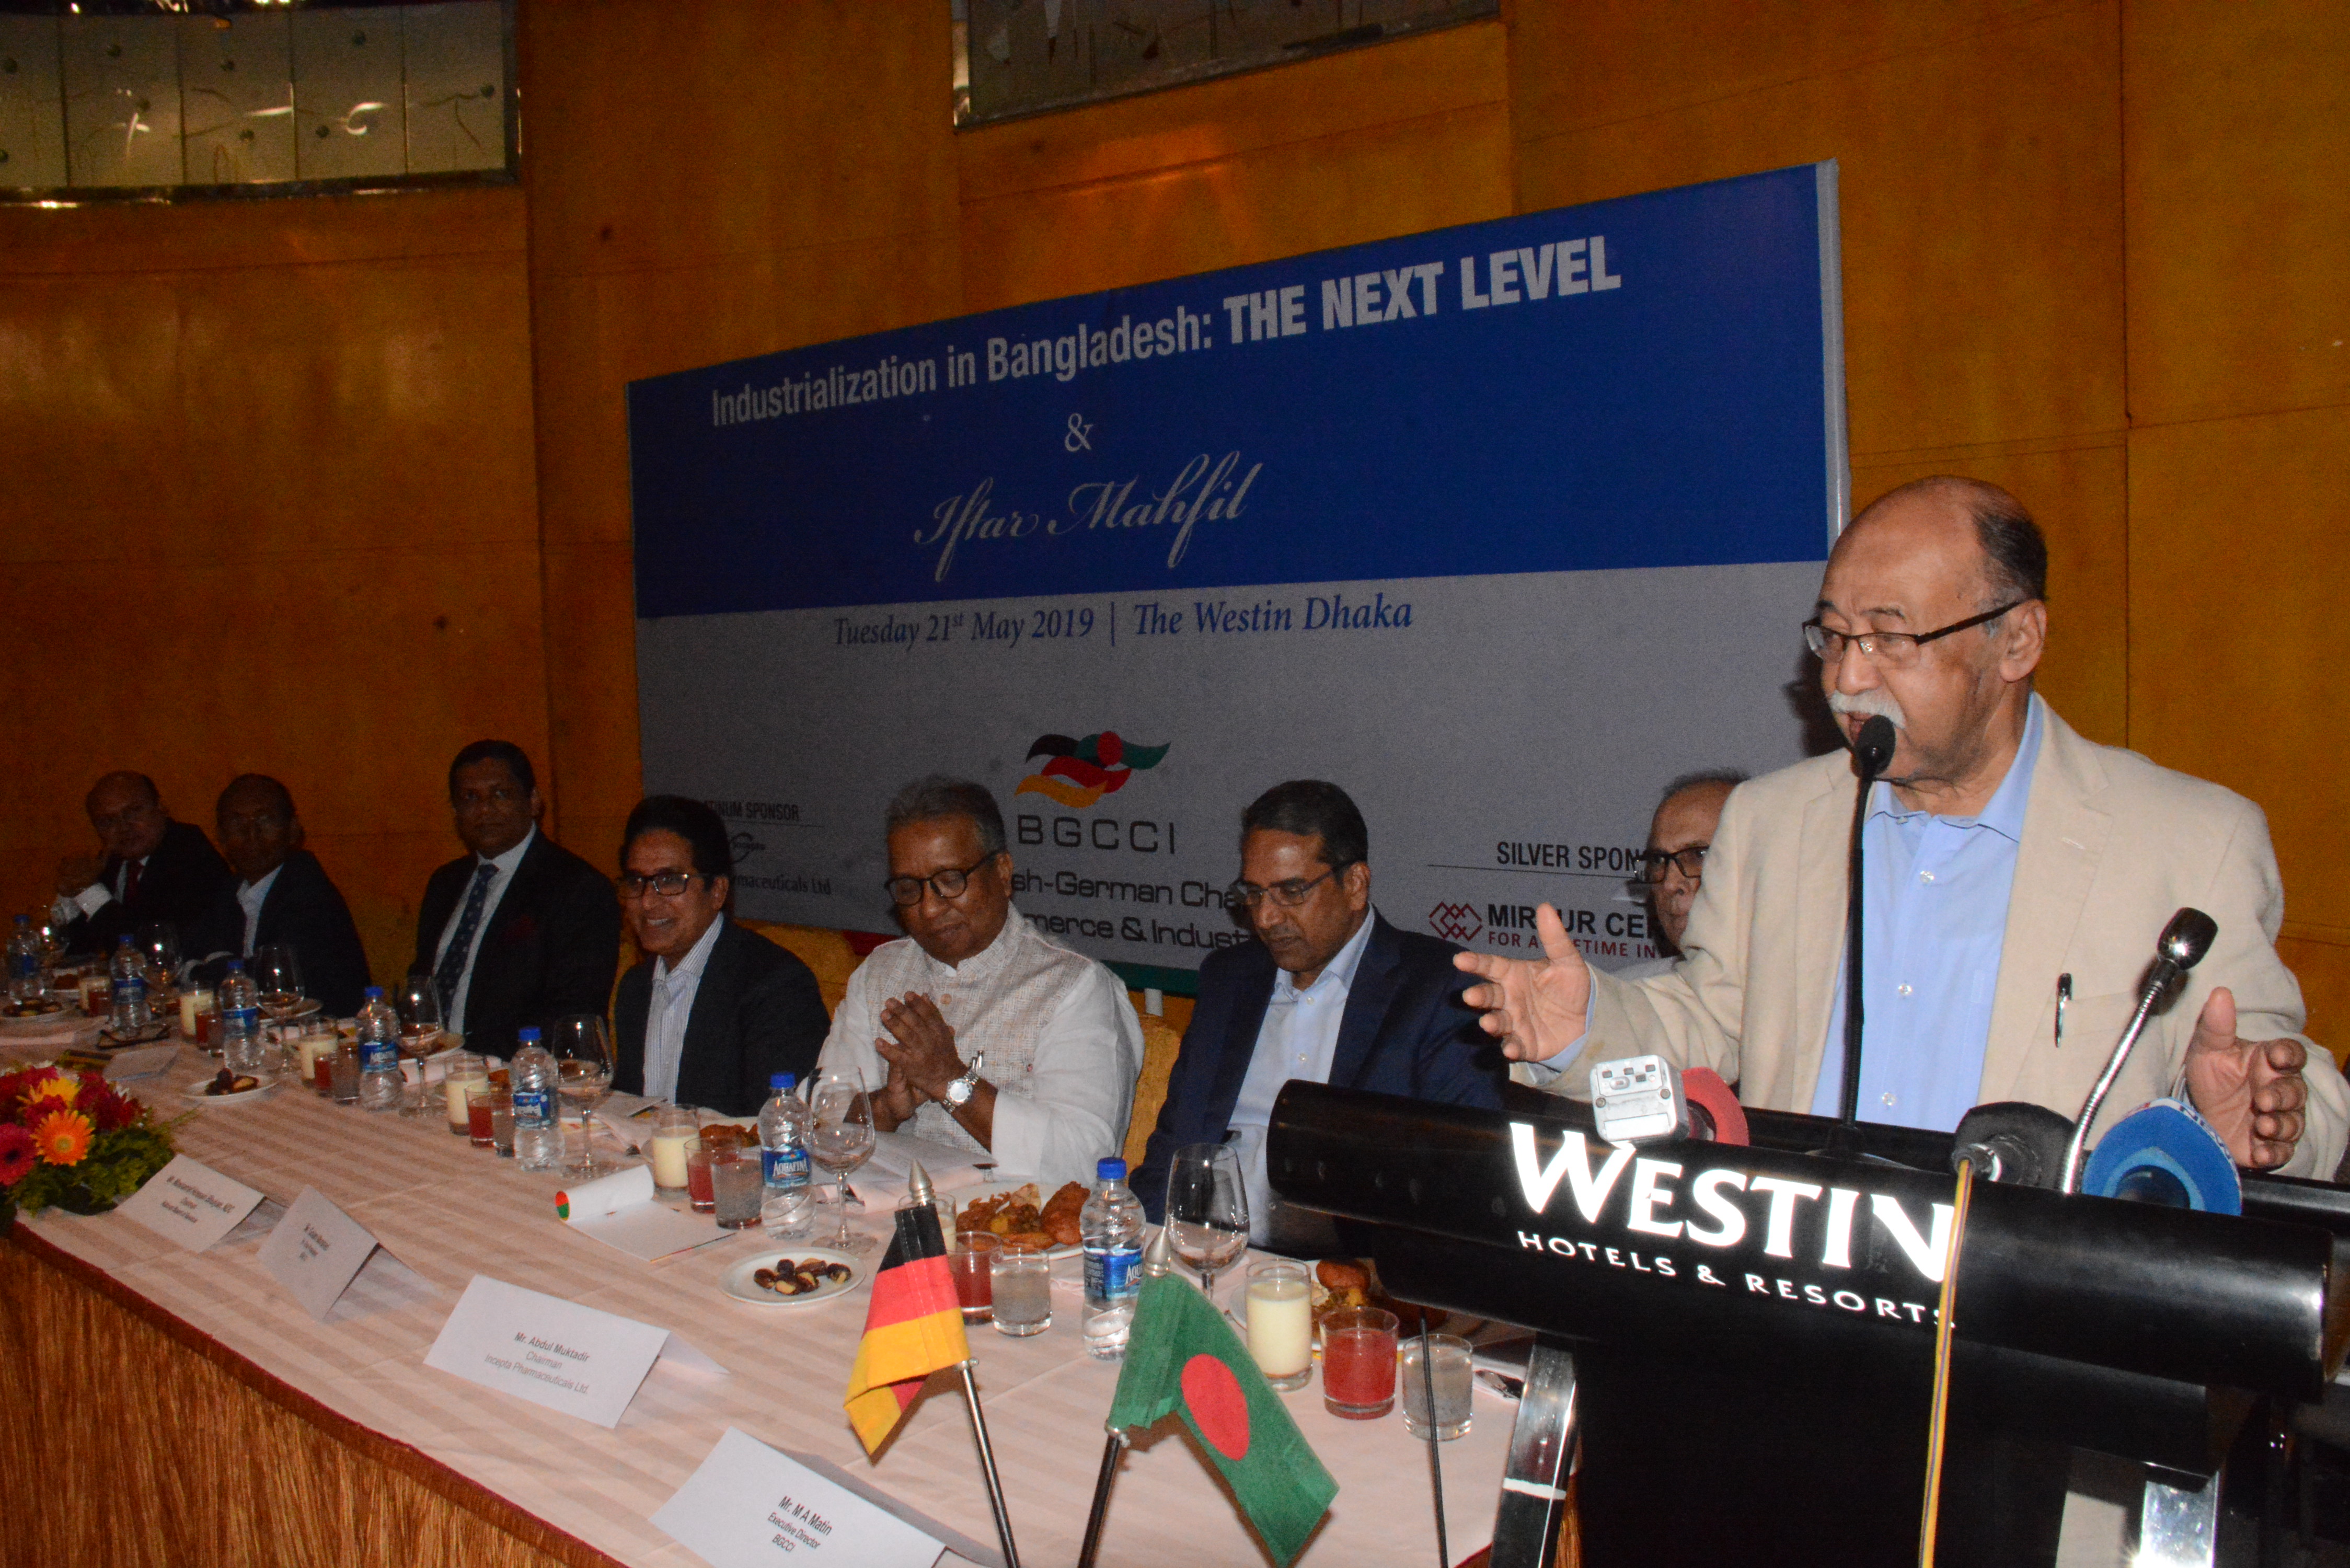 Bangladesh-German Chamber of Commerce & Industry (BGCCI) organized a seminar on industrialization in Bangladesh:The Next Level and Iftar Mahfil at a city hotel